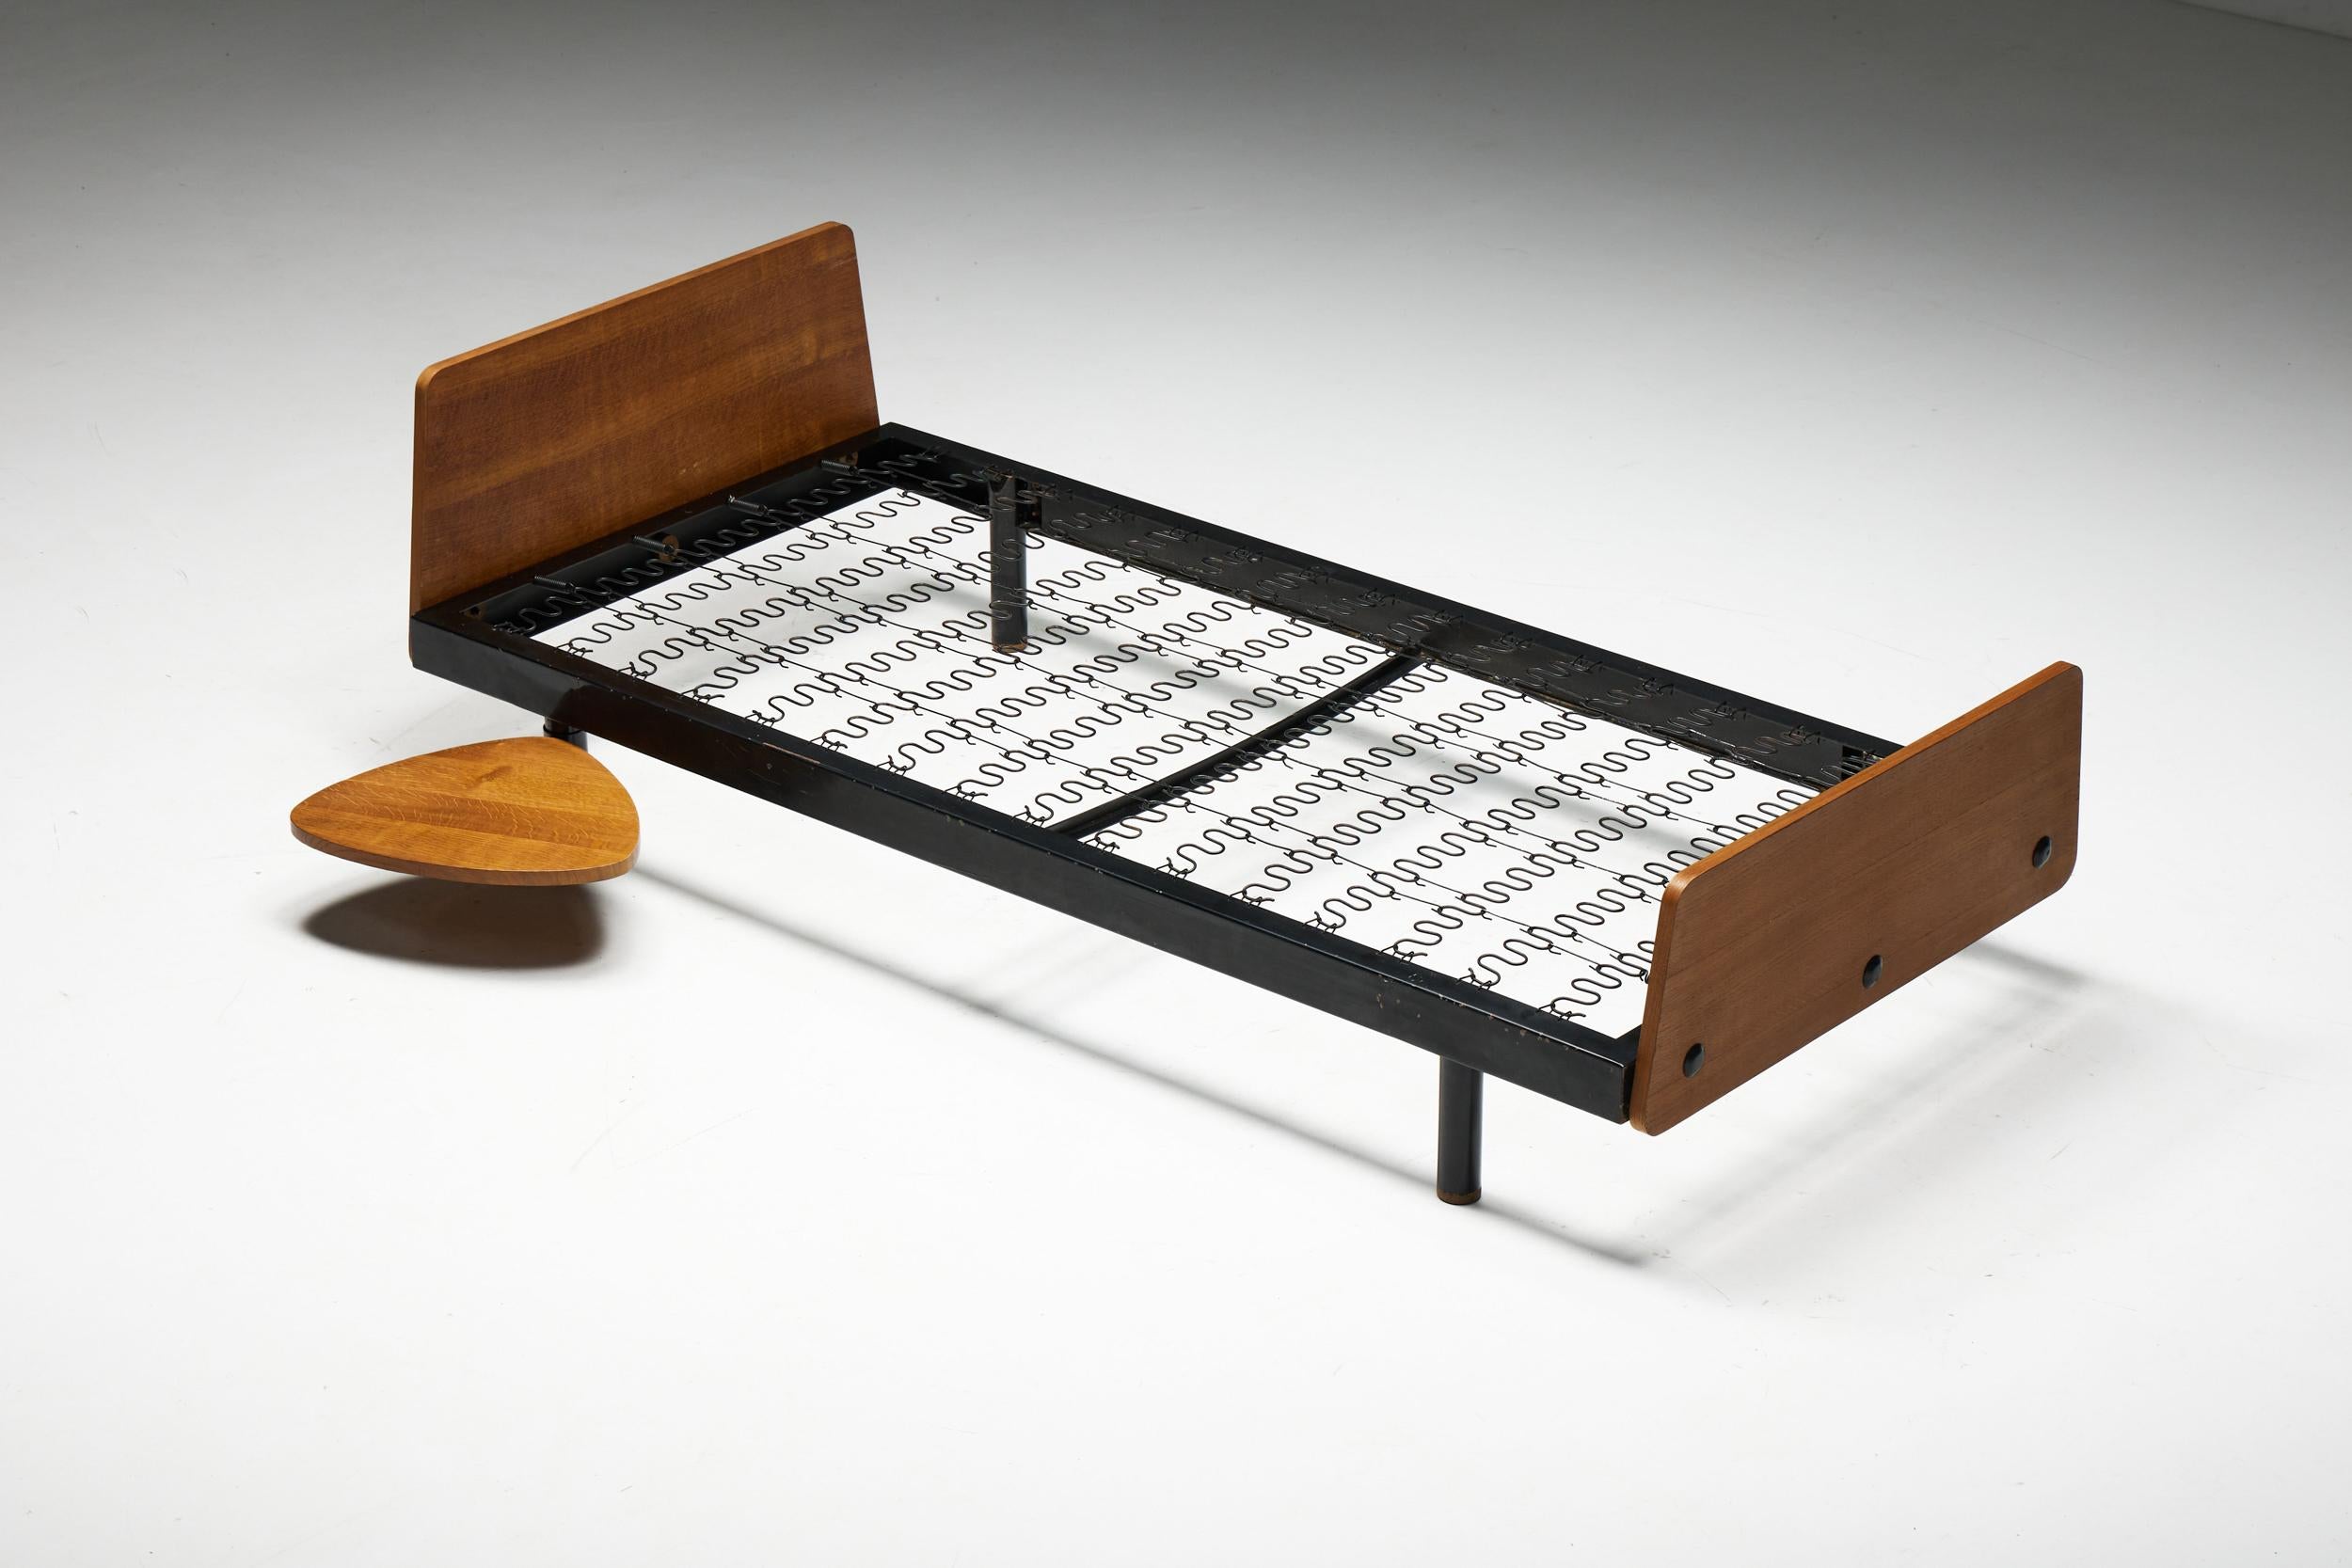 Midcentury Modern; Modernist Design; Cité Cansado; Charlotte Perriand; Jean Prouvé; Modernism; S.C.A.L Daybed; Bed; 1950s; Mid-20th Century; Type Flavigny;

Daybed type Flavigny, designed by Jean Prouvé in the 1950s. This exceptional piece features